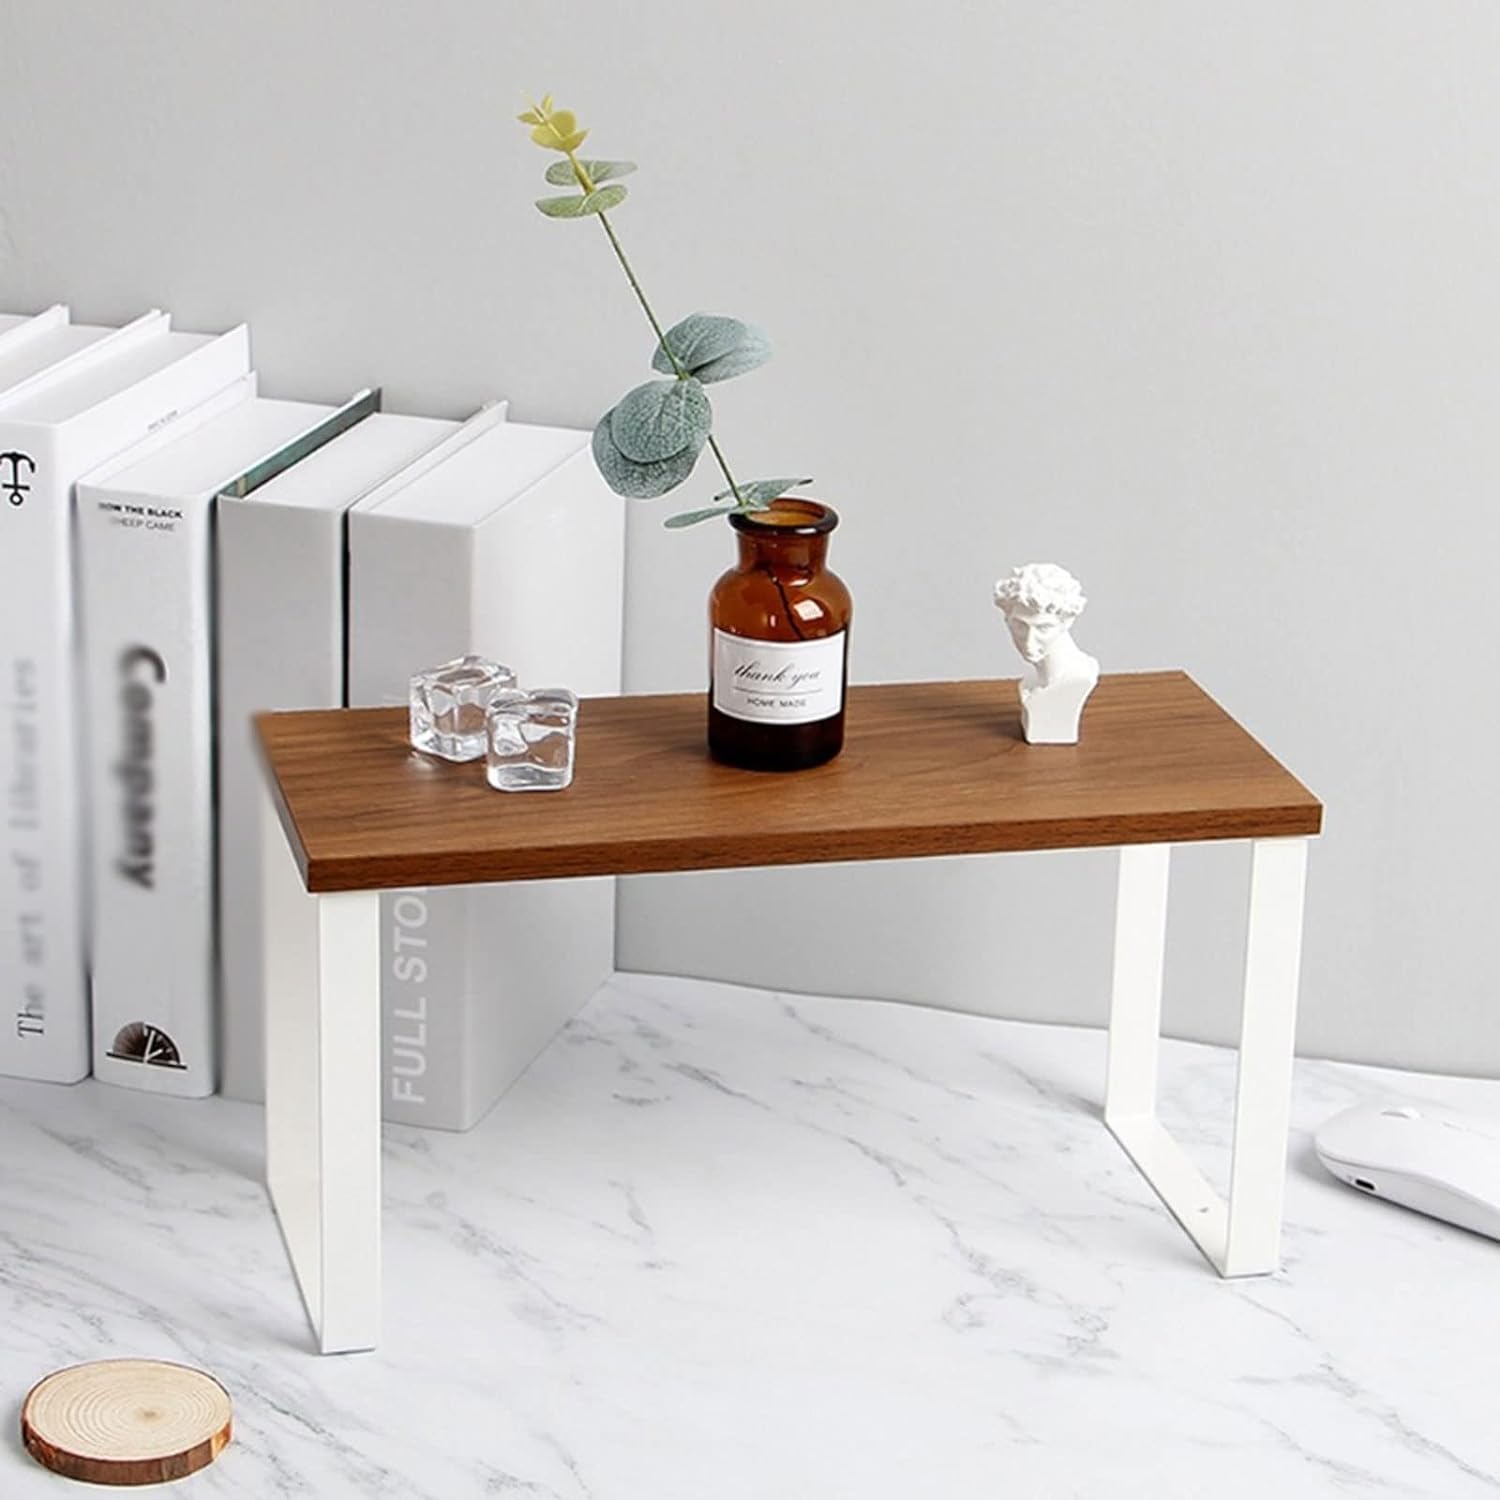 Wooden storage shelf with sturdy bases in brown and white